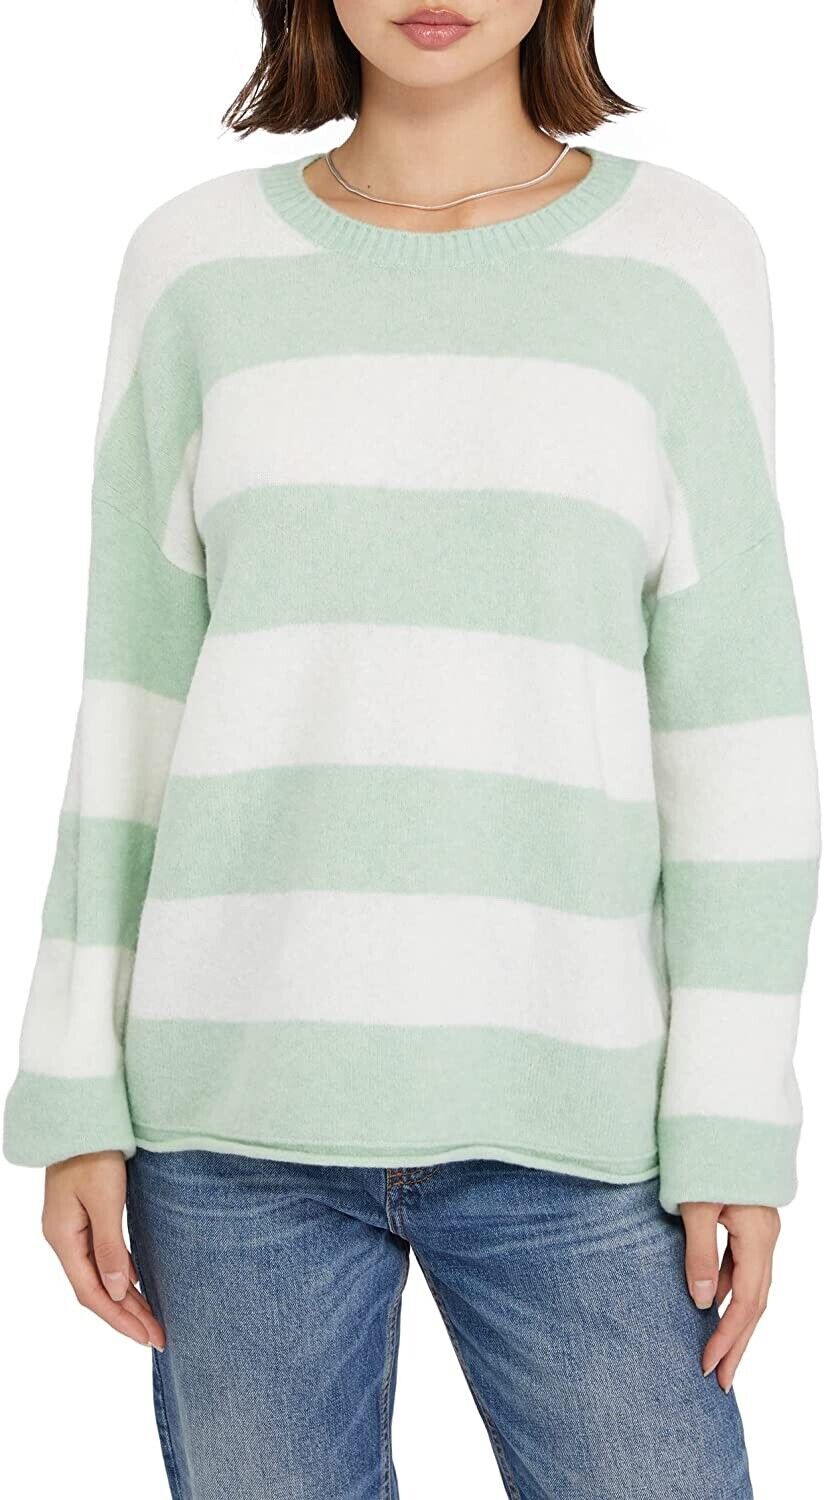 Sanctuary Eye On You Sweater Recycle Green Stripe LG (US 10-12)